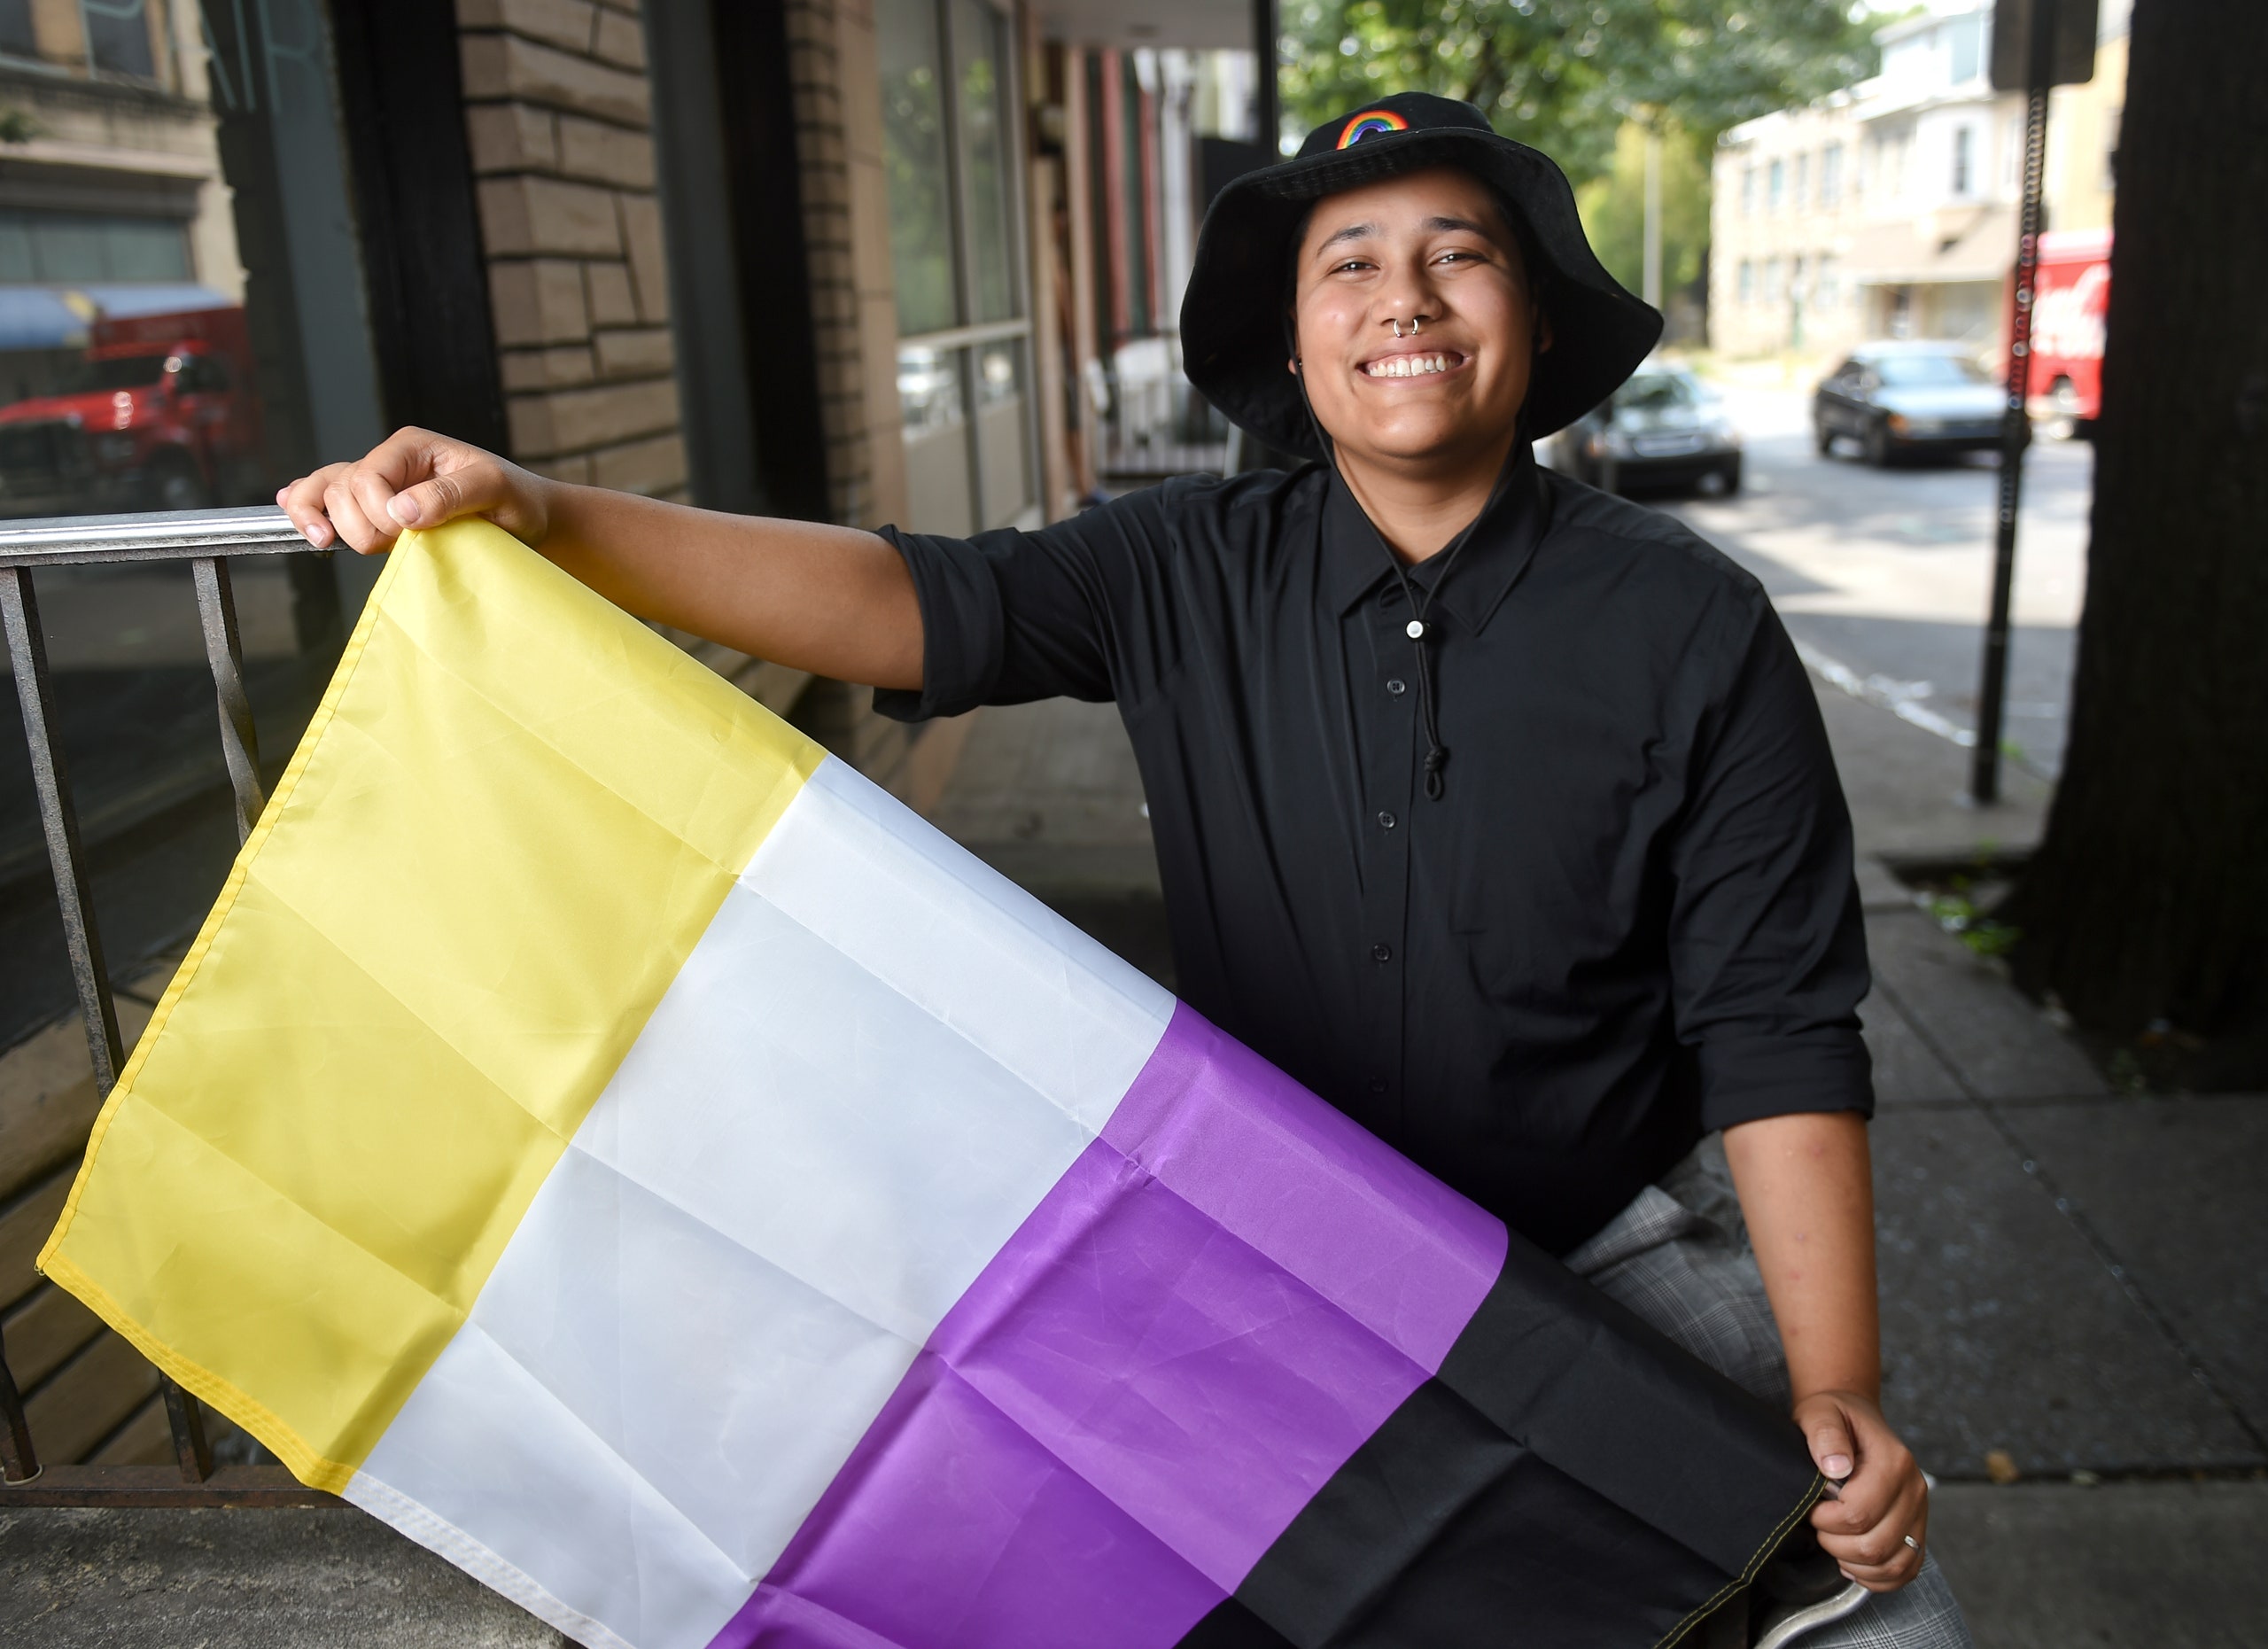 Over 25% of LGBTQ+ Youth Identify as Nonbinary, According to Groundbreaking Study. them